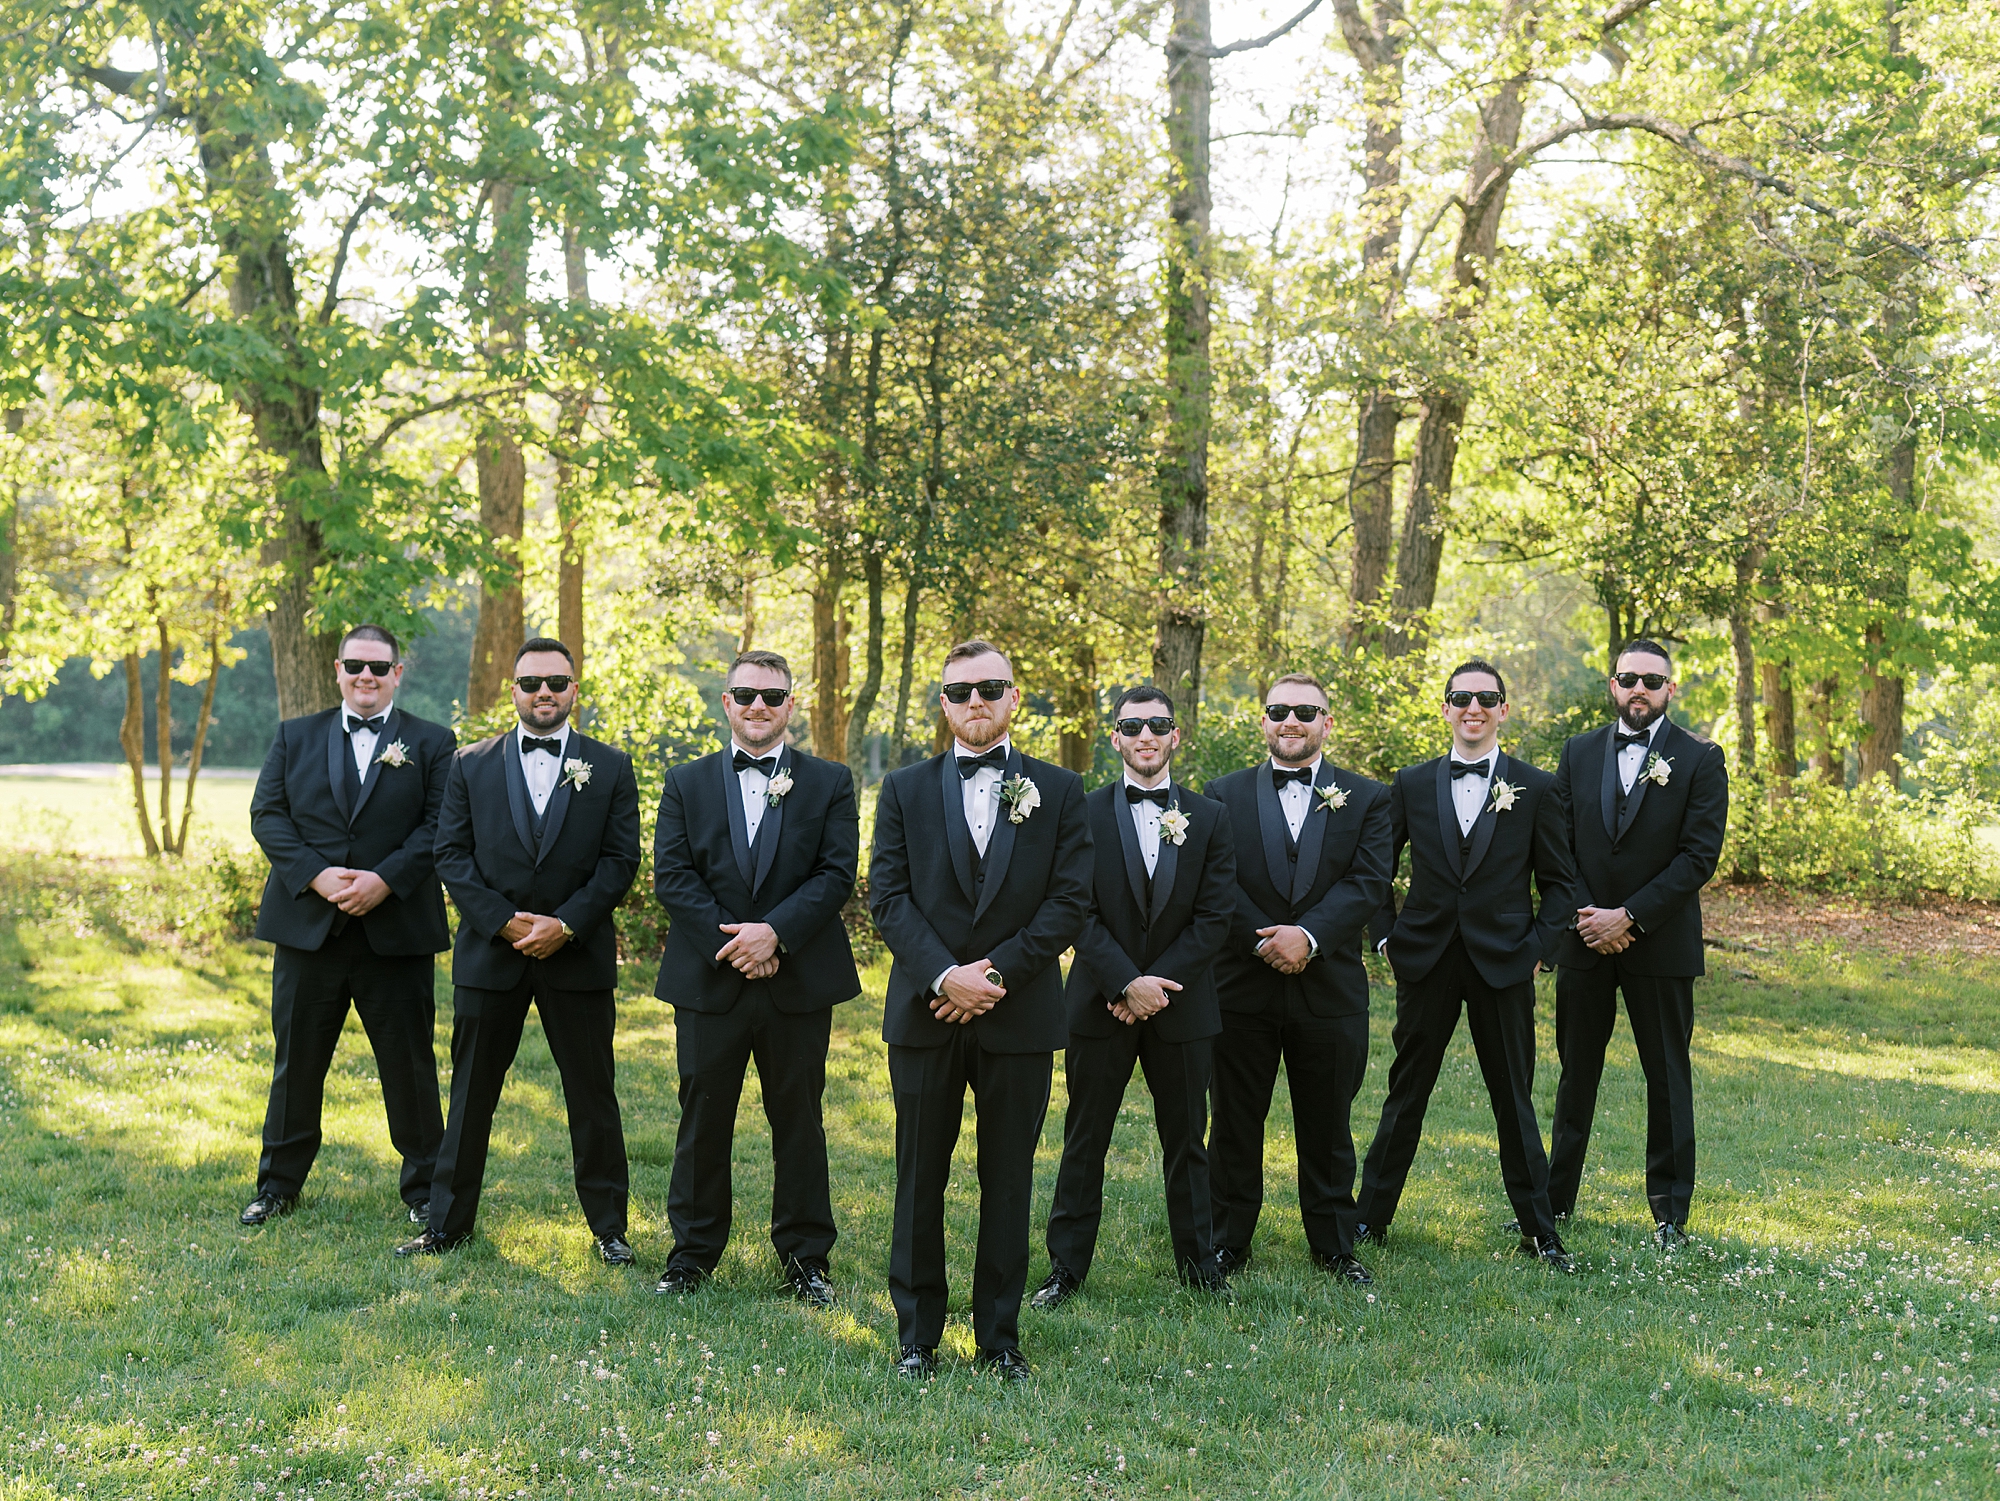 groom and groomsmen walk in suits with sunglasses at The Grove at CentertonThe Grove at Centerton